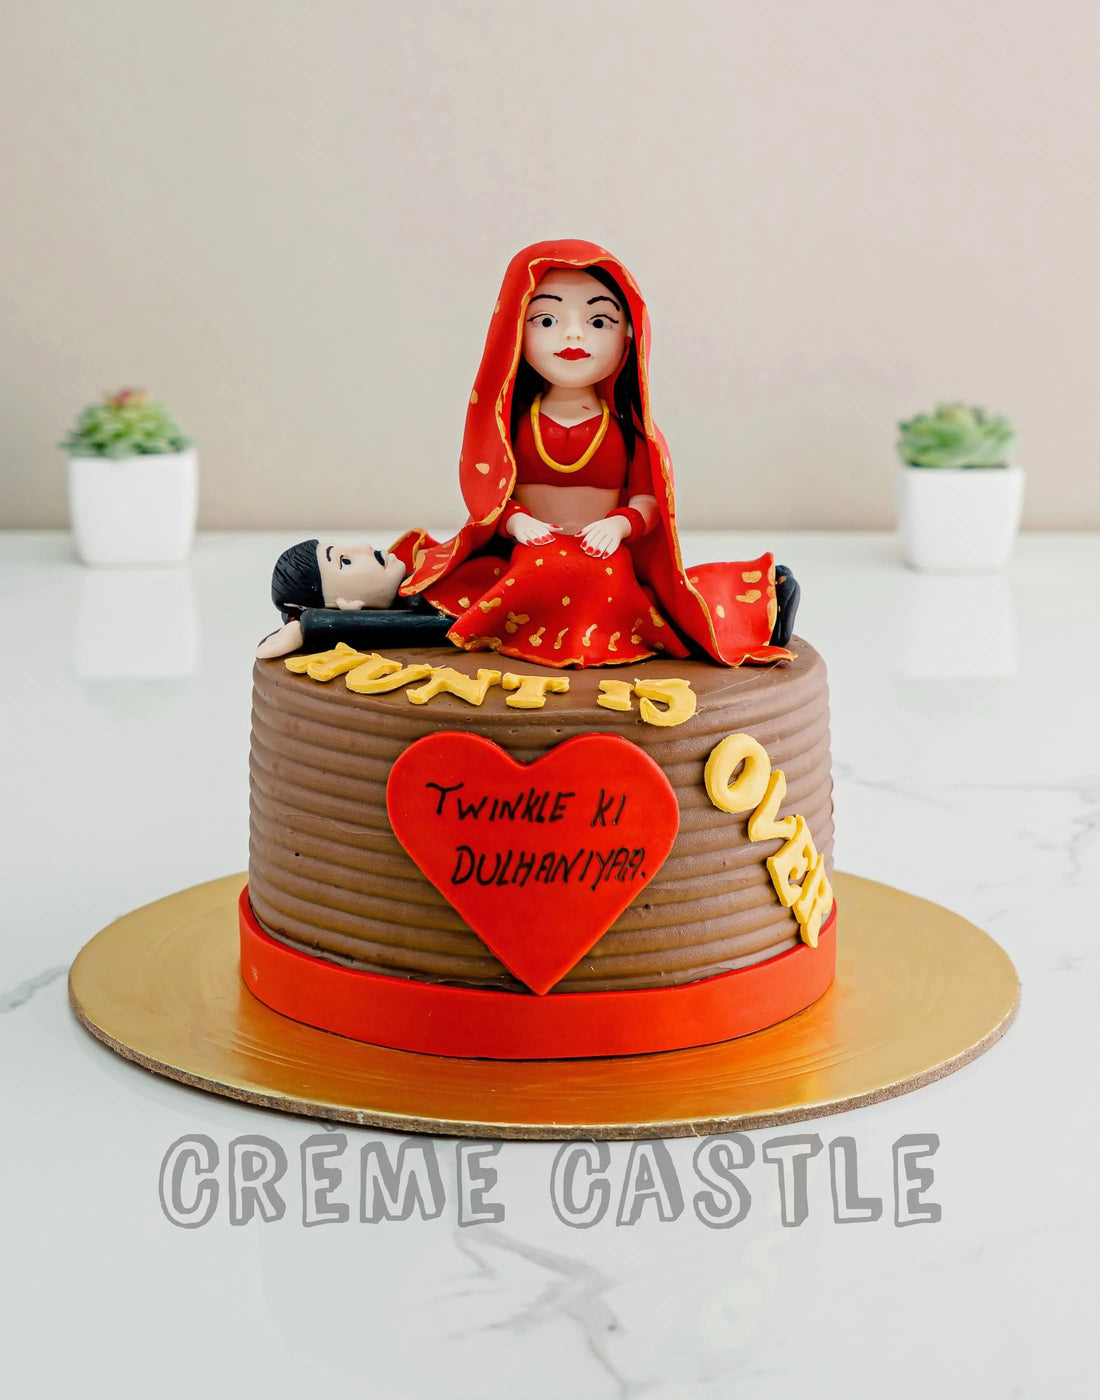 Bride To be Cake in Lehenga by Creme Castle